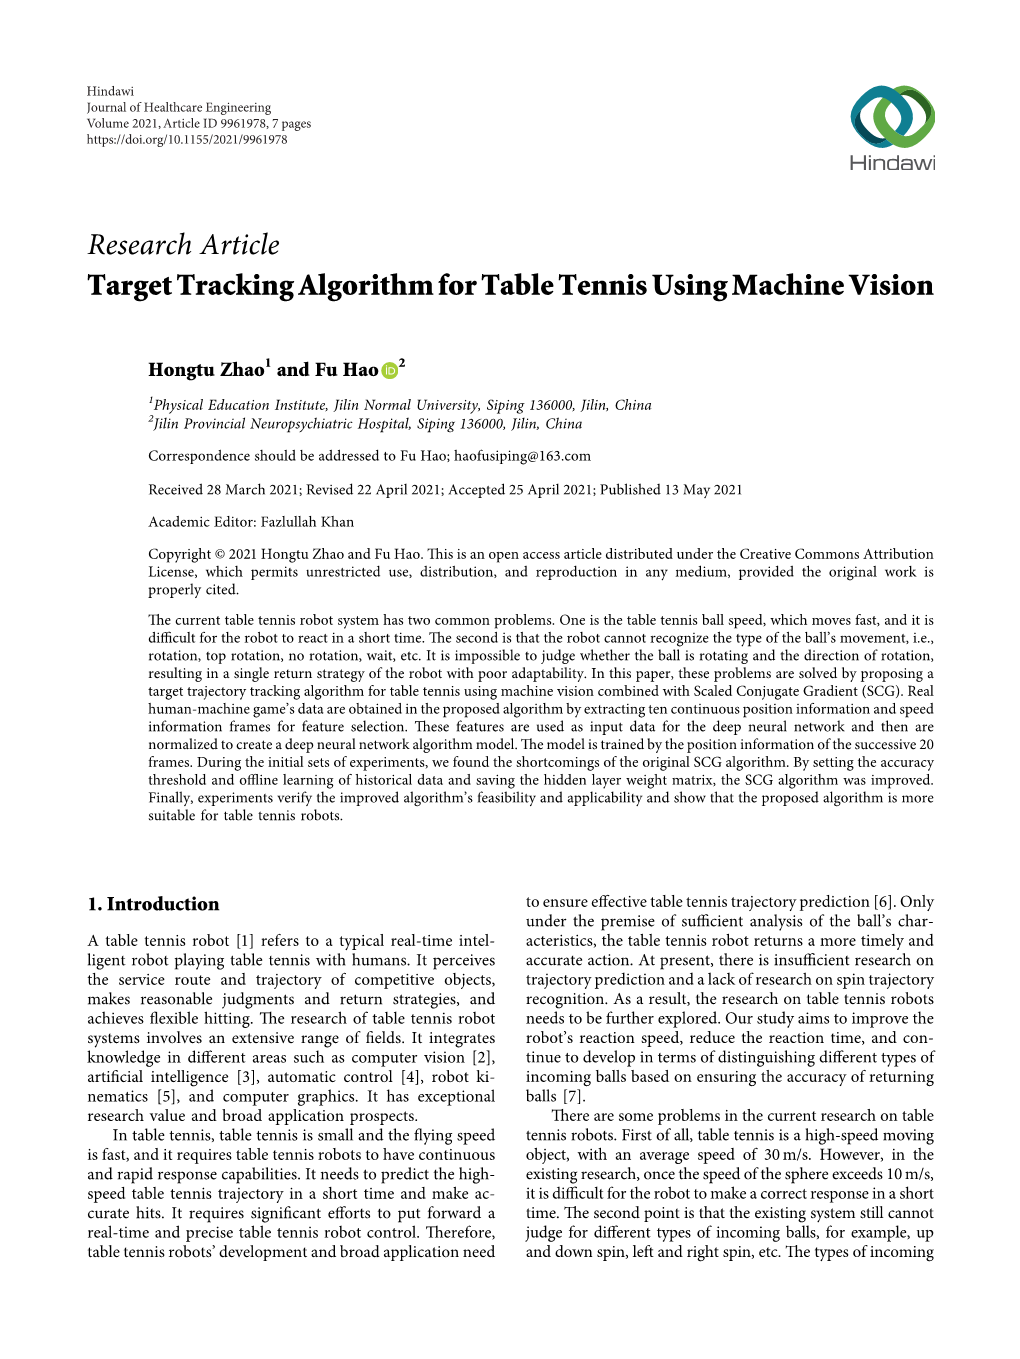 Target Tracking Algorithm for Table Tennis Using Machine Vision